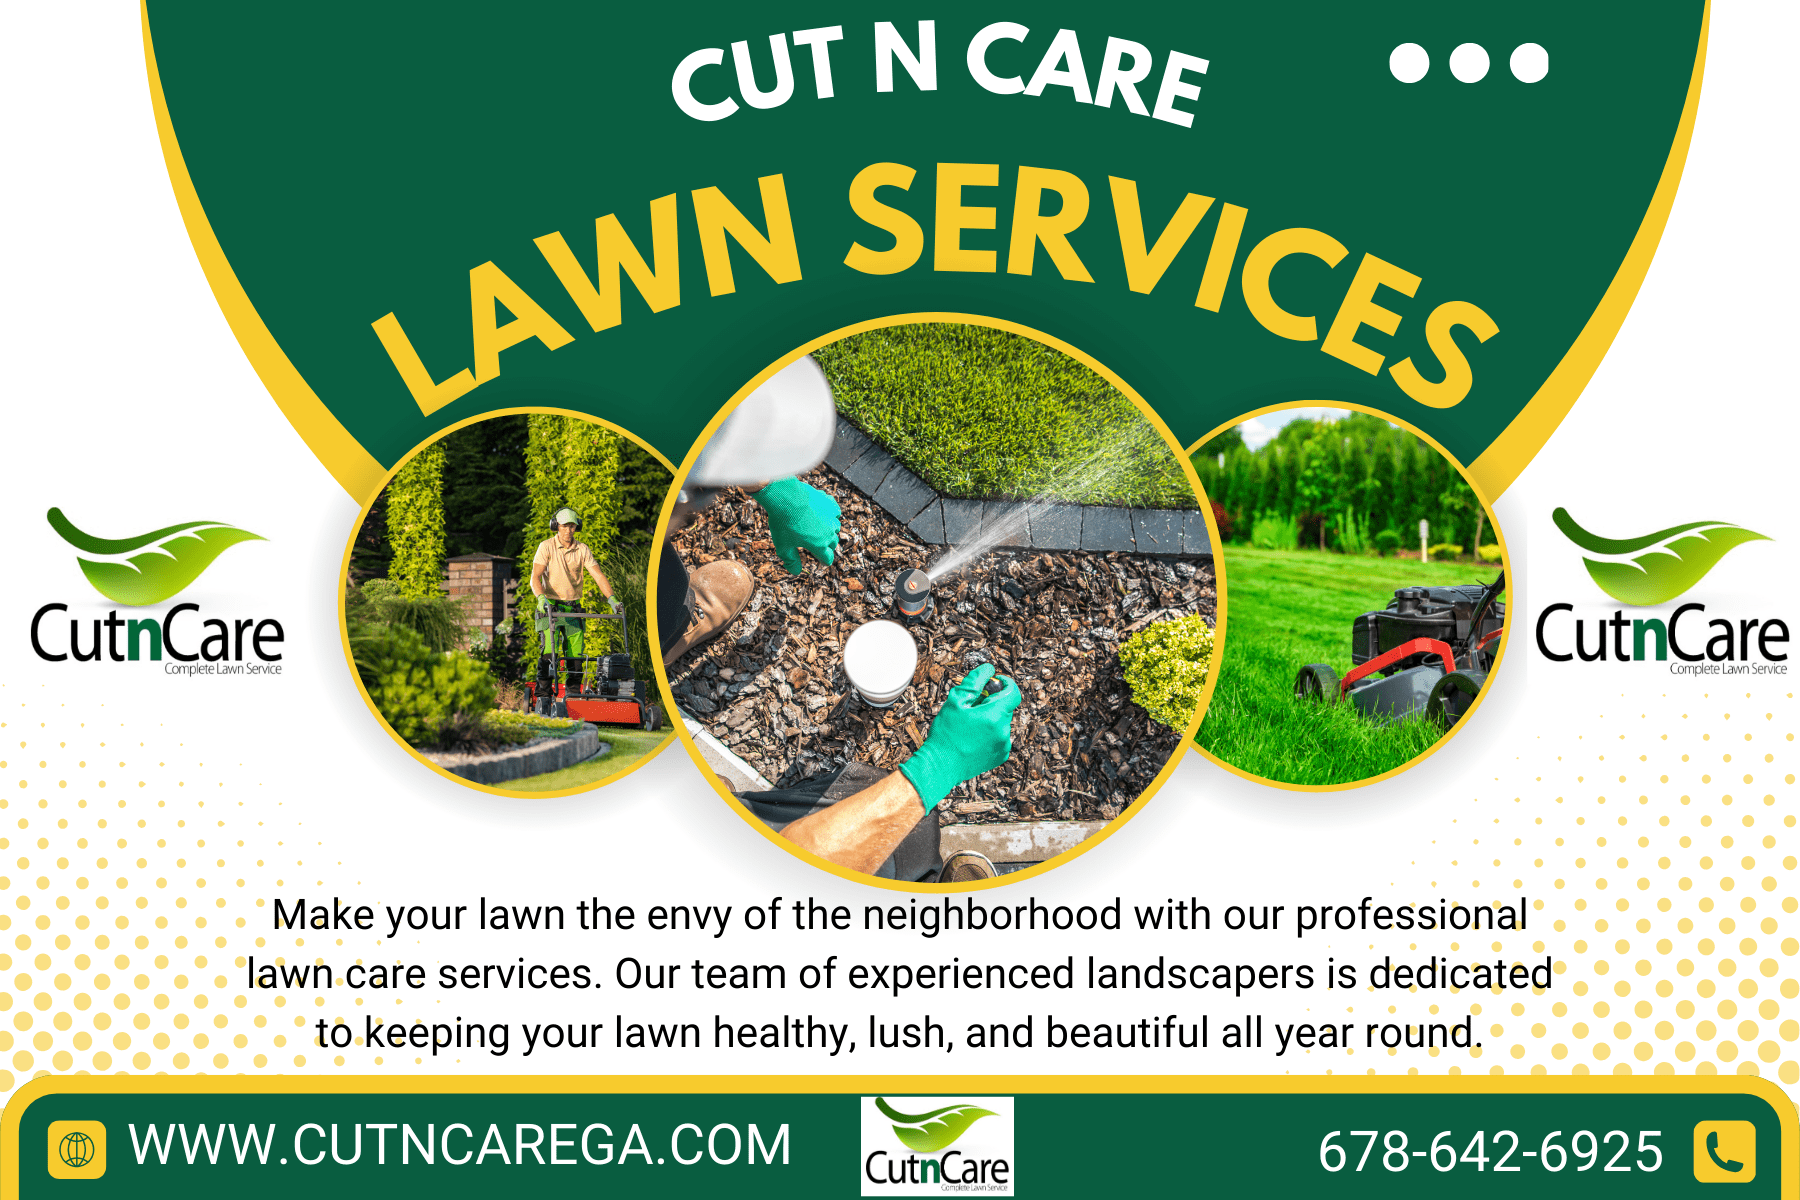 Featured image for “Cut N Care Lawn Services”